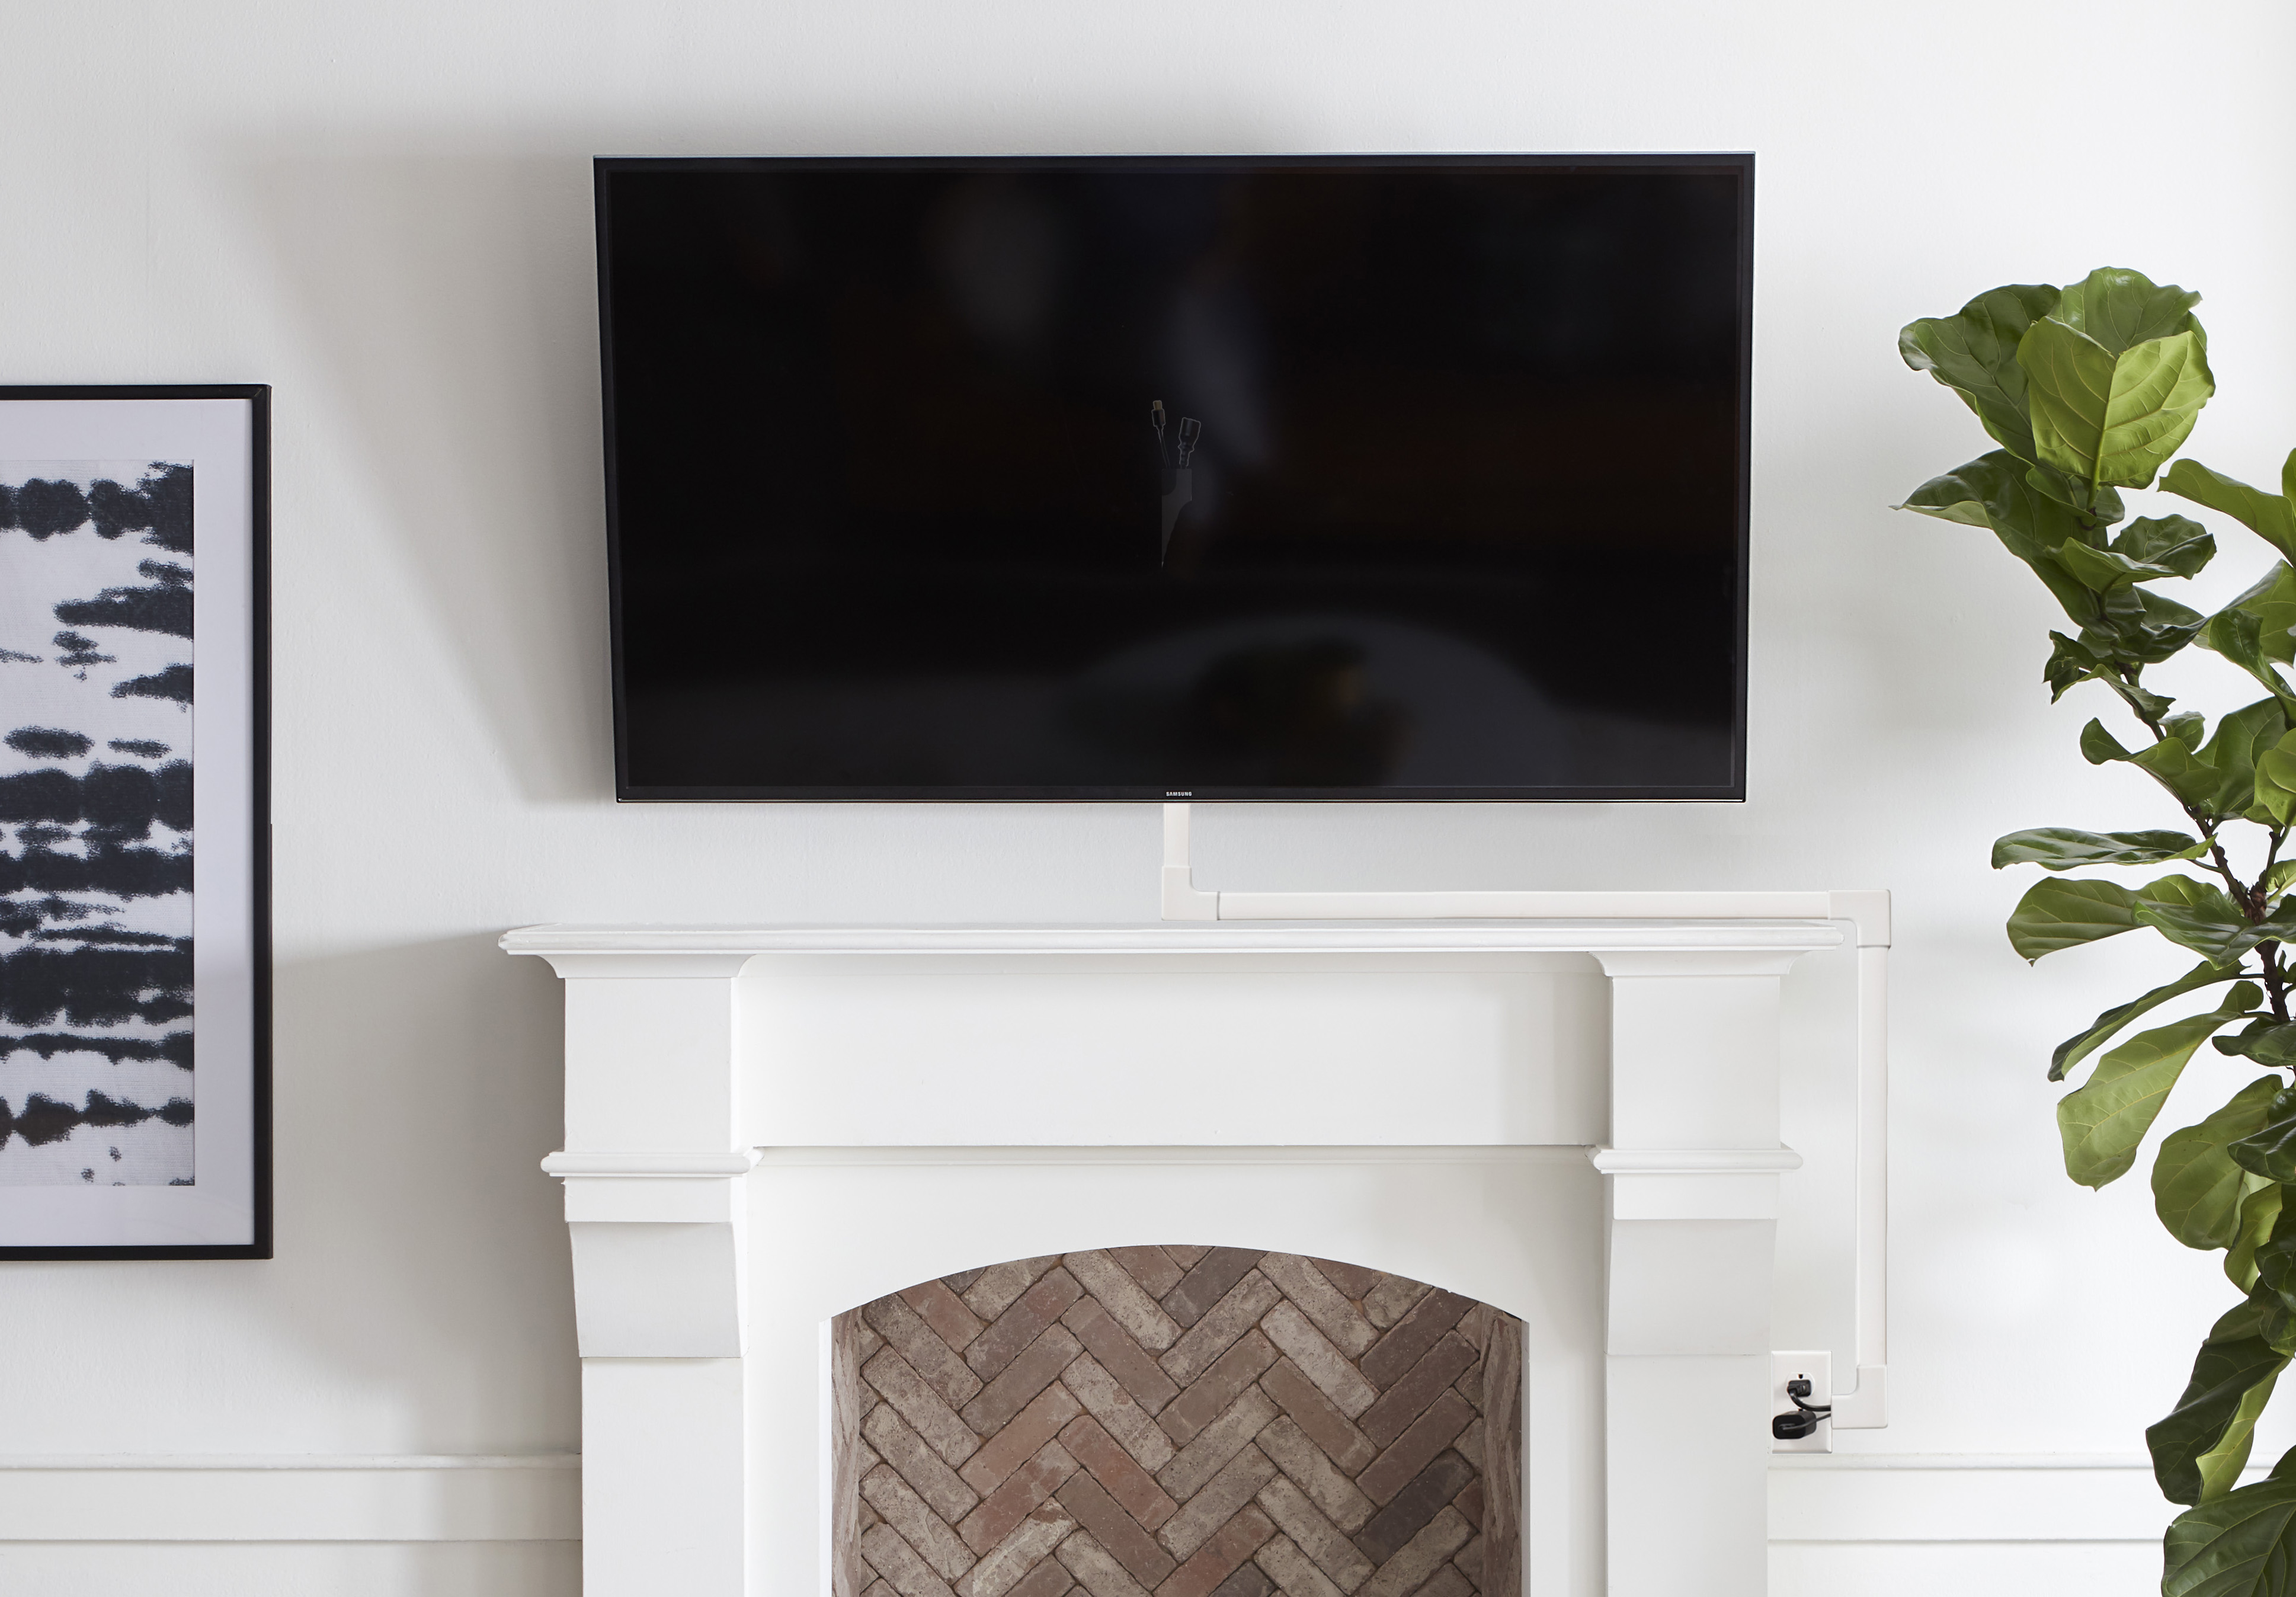 How to Hide TV Wires Behind a Wall - Even with a Fire Block